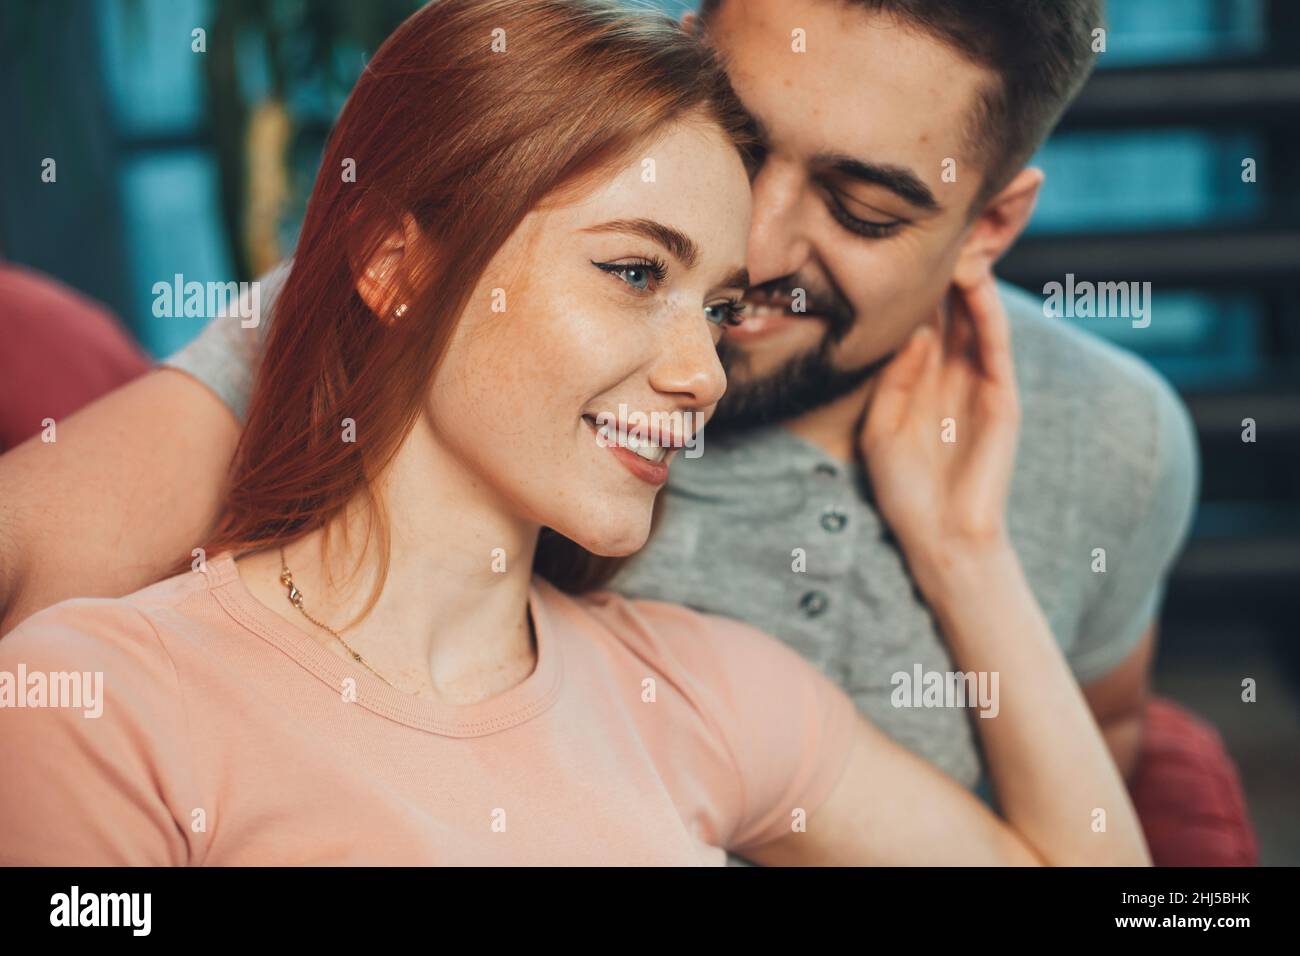 Close-up view of a Caucasian couple sitting on the couch on the weekend, freckled woman with red hair touching sensually her boyfriend's face. Stock Photo